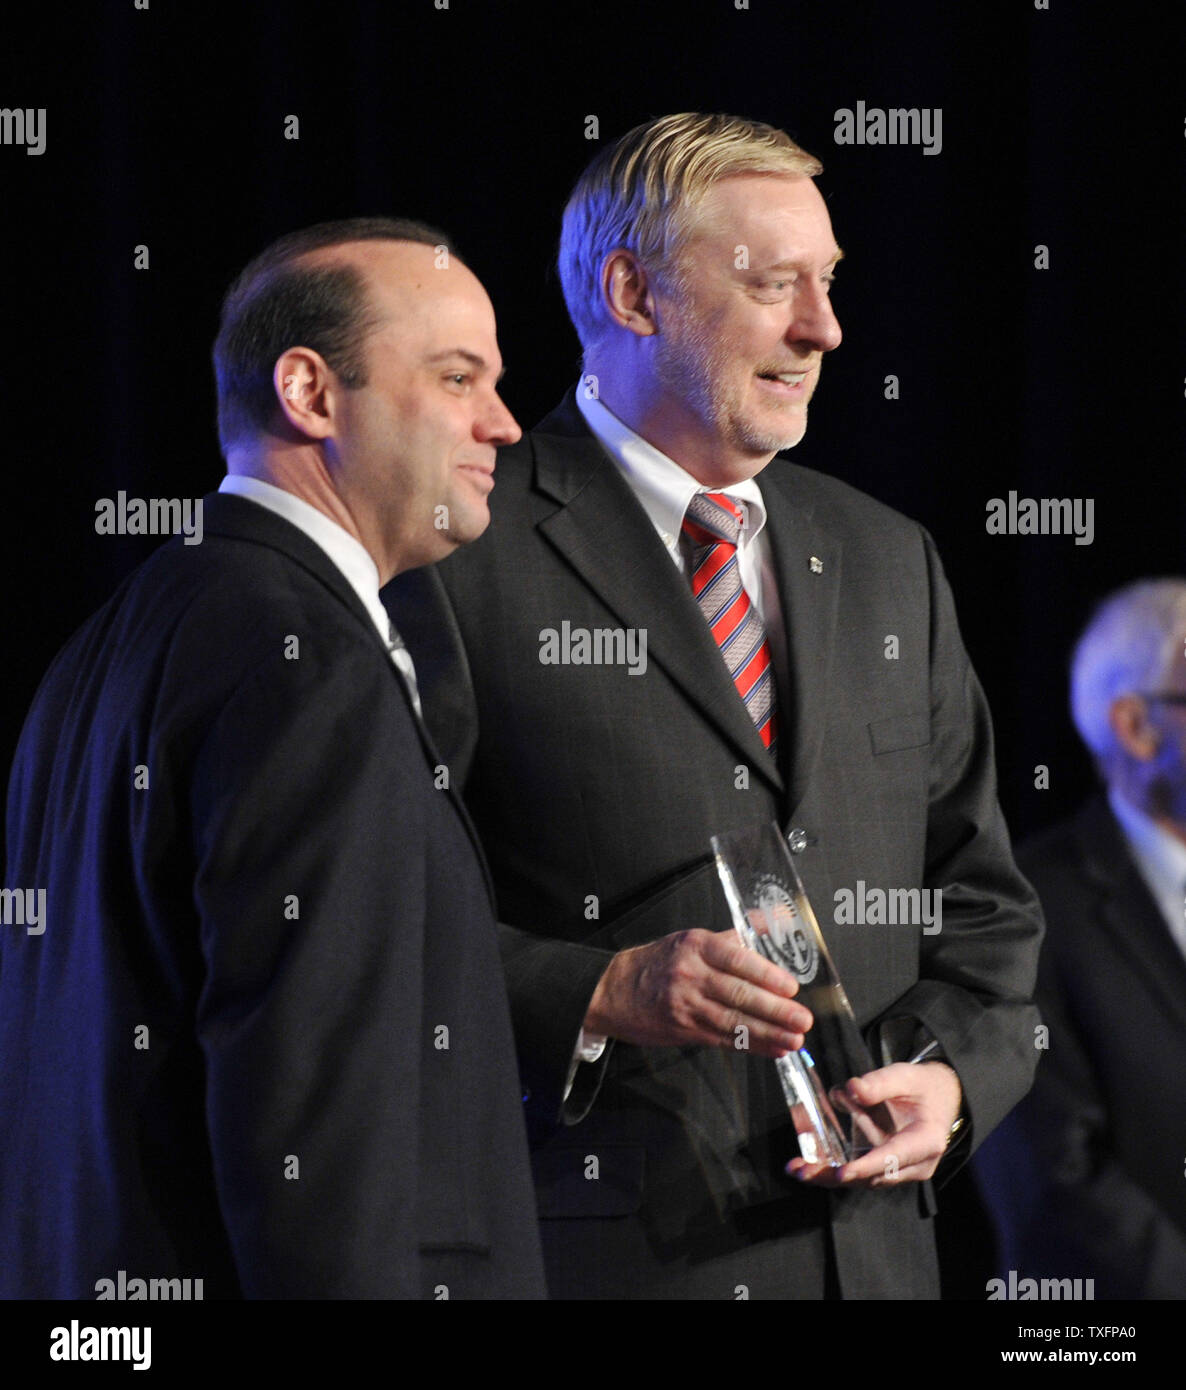 Tom Stevens (L) vice chairman of General Motors Global Product Operation, receives the 2011 North American Car-of-the-Year award from Edmunds editor-in-cheif Karl Brauer at the 2011 North American International Auto Show at the Cobo Center in Detroit on January 10, 2011. The 2011 Chevrolet Volt won the award.     UPI/Brian Kersey Stock Photo